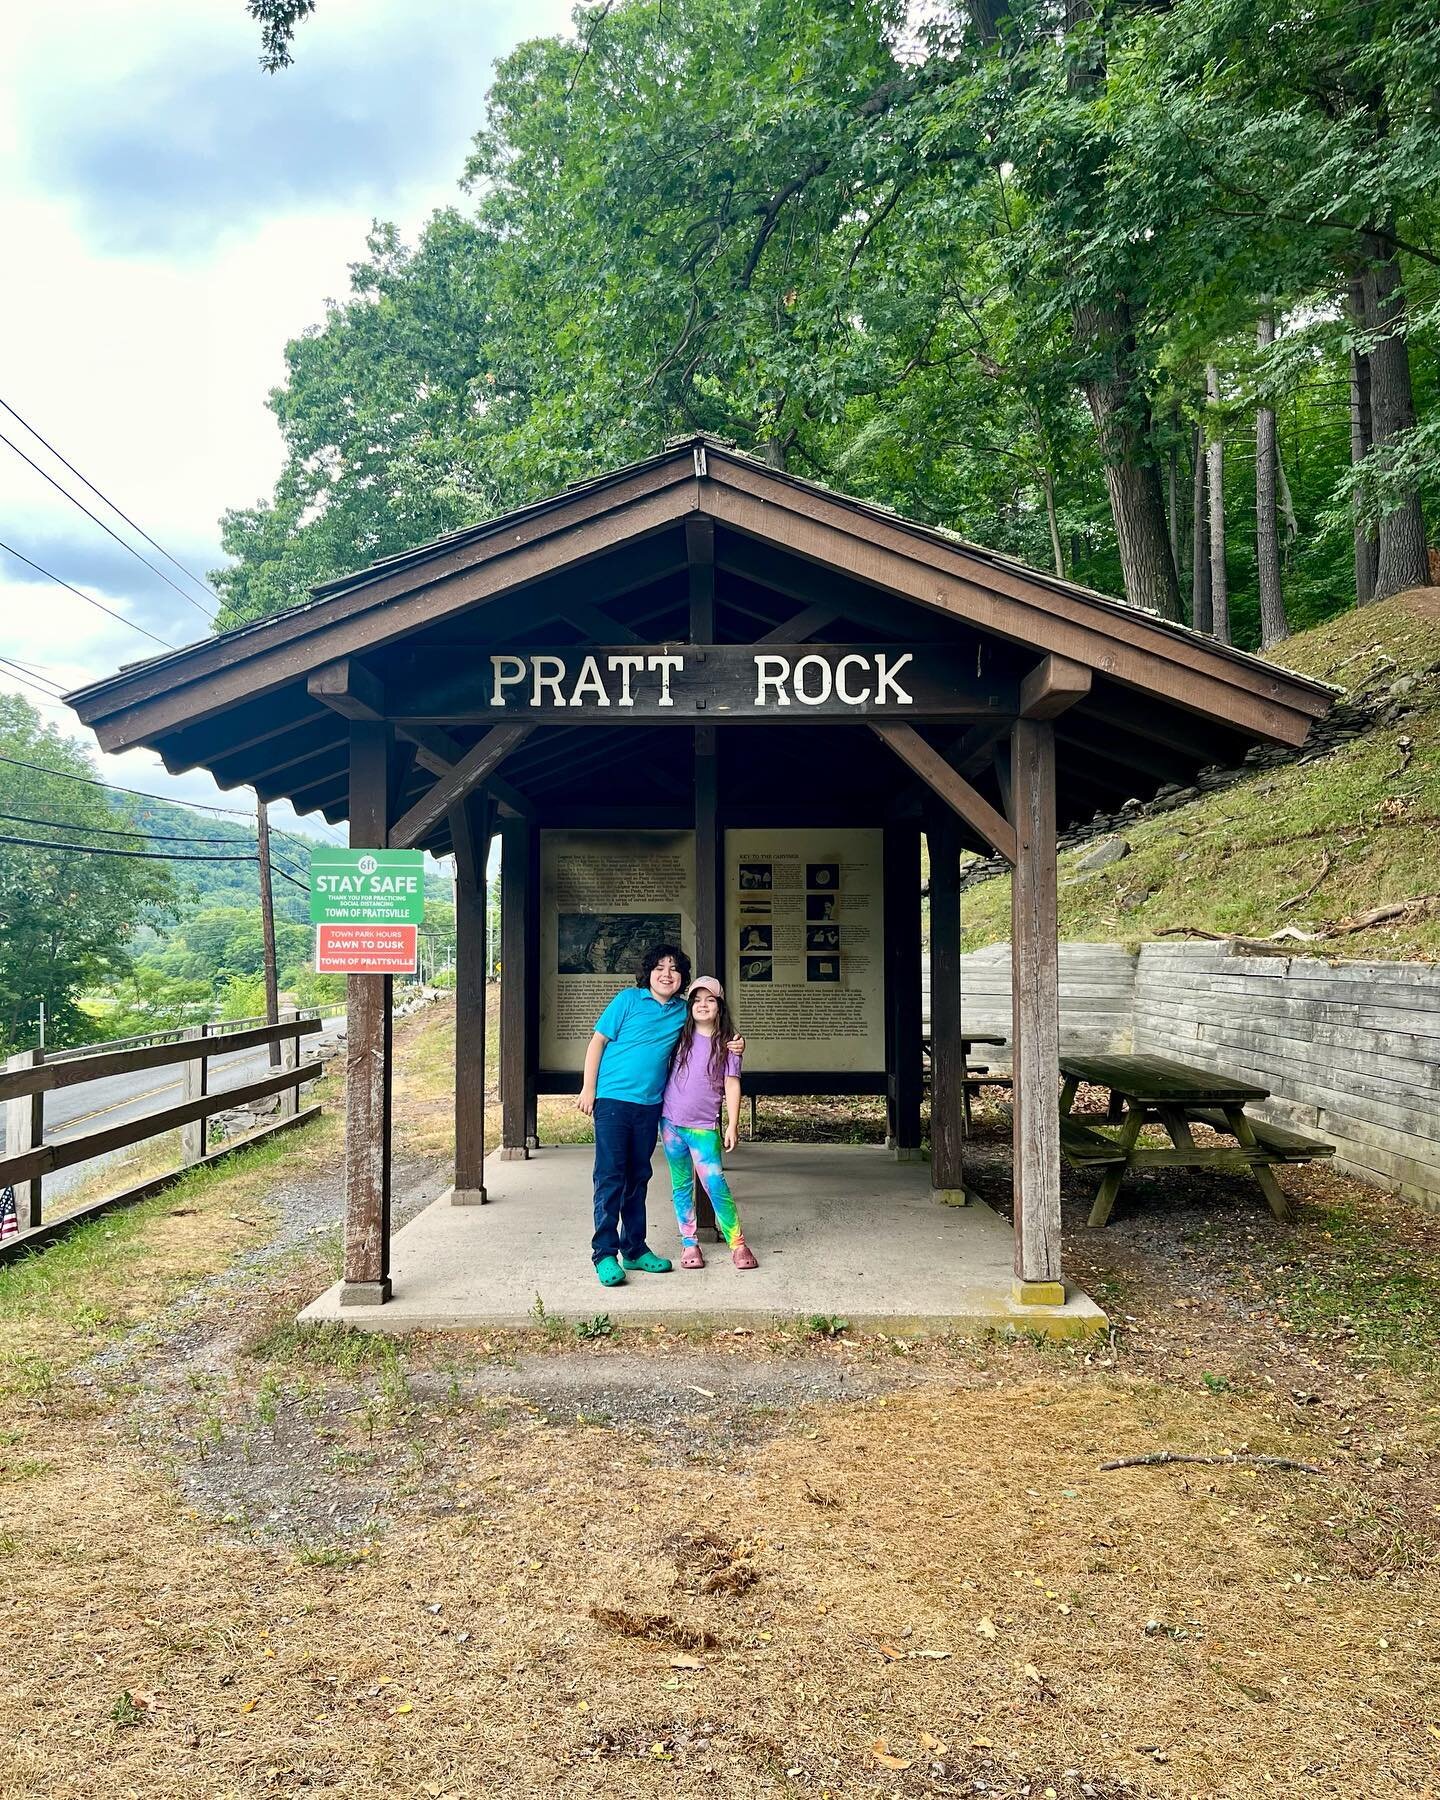 Is Pratt Rock Trail a safe #hike for kids? With steep slopes, swarms of wasps, and pet cemetery vibes, I wouldn&rsquo;t recommend it for beginners. (Some of the views were breathtaking, though!)
⁣
Read all about our harrowing hike, which resulted in 